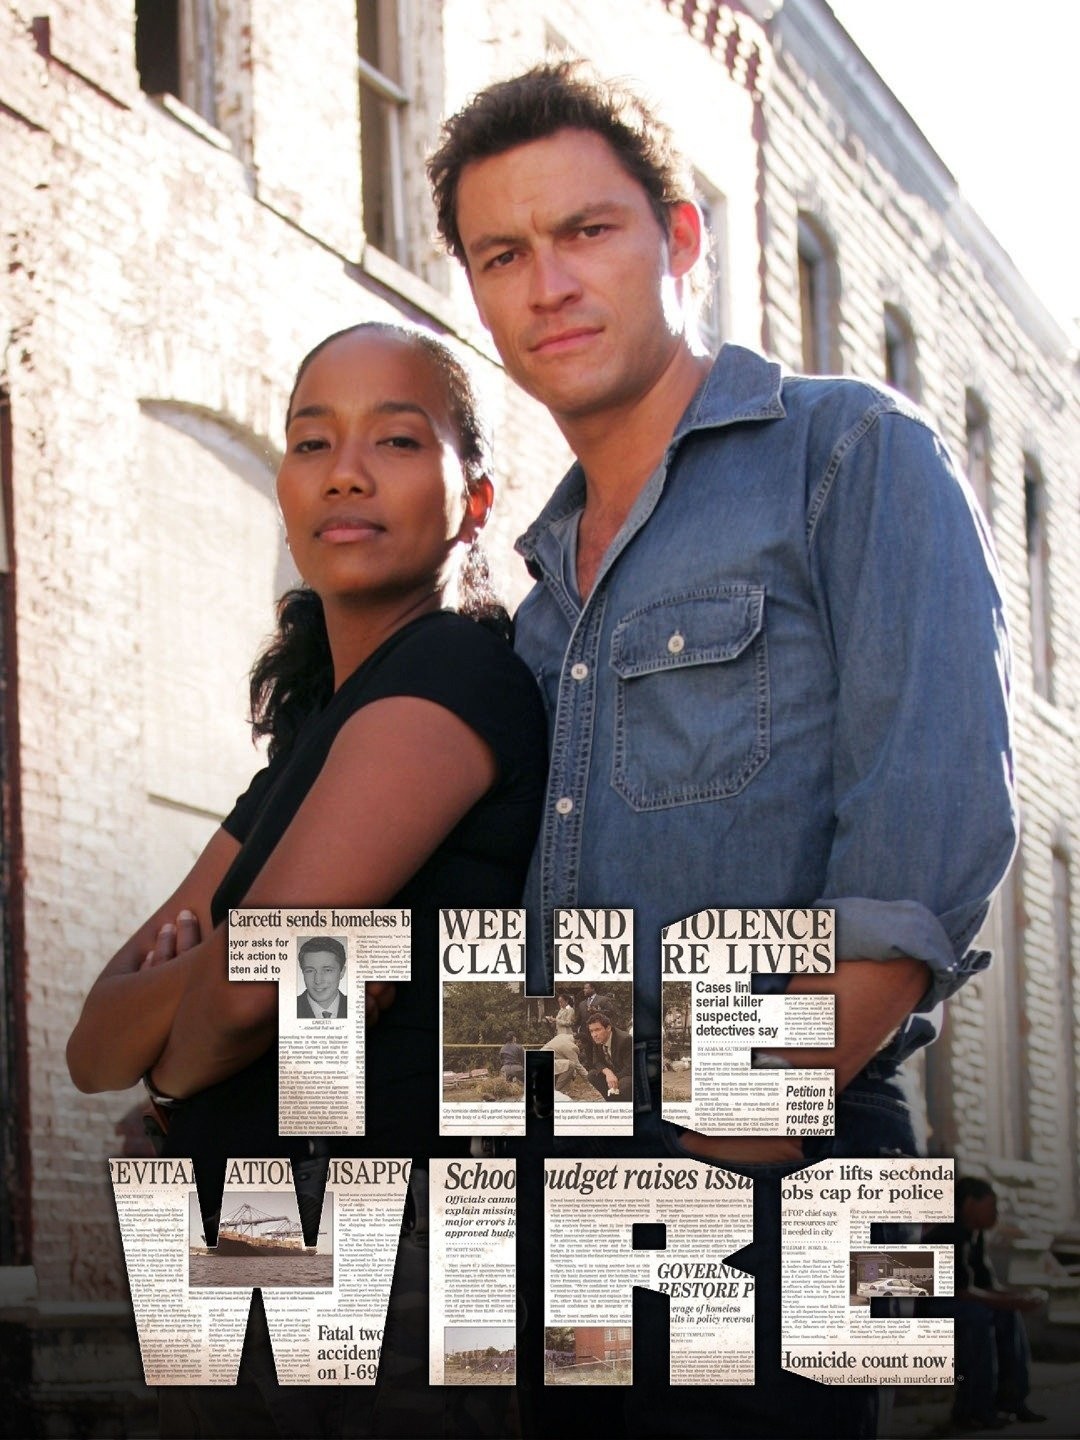 The Wire  Rotten Tomatoes